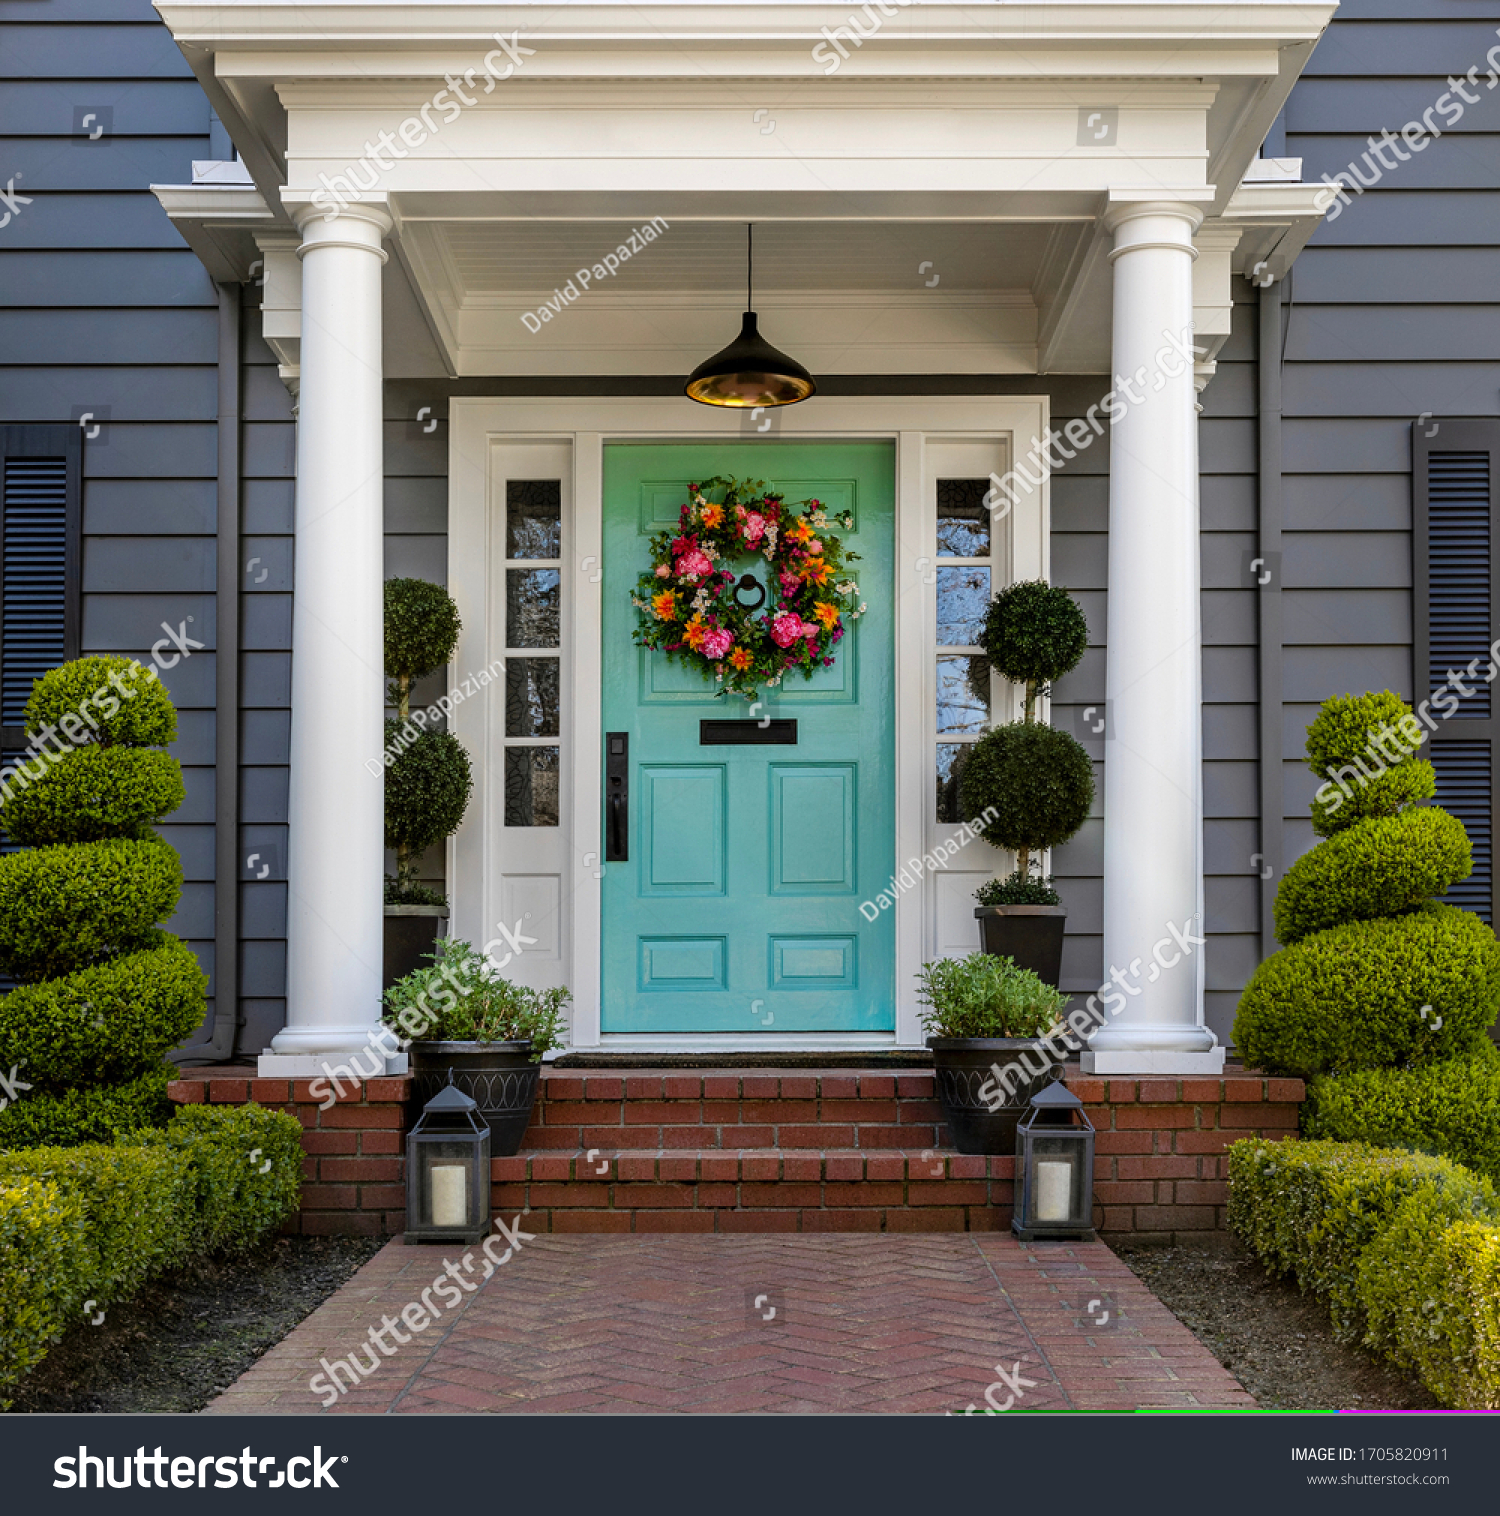 Beautifully decorated turquoise colored front door of traditional home. Brick path and trimmed hedges. #1705820911